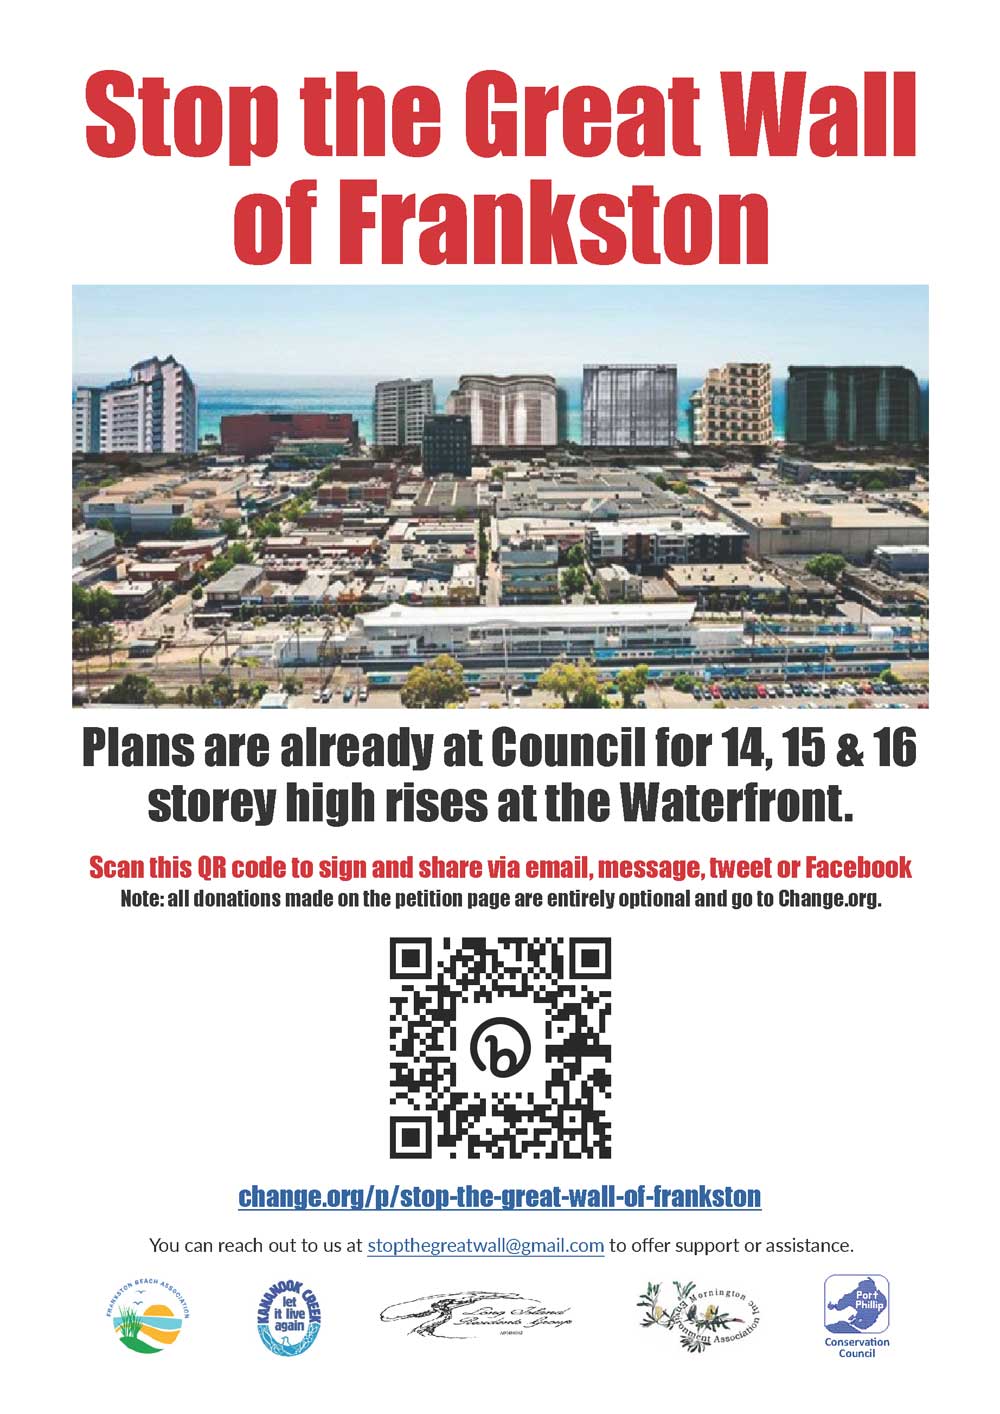 Plans are already at Council for 14, 15 & 16 storey high rises at the Waterfront. change.org/p/stop-the-great-wall-of-frankston Conservation Council You can reach out to us at stopthegreatwall@gmail.com to offer support or assistance.